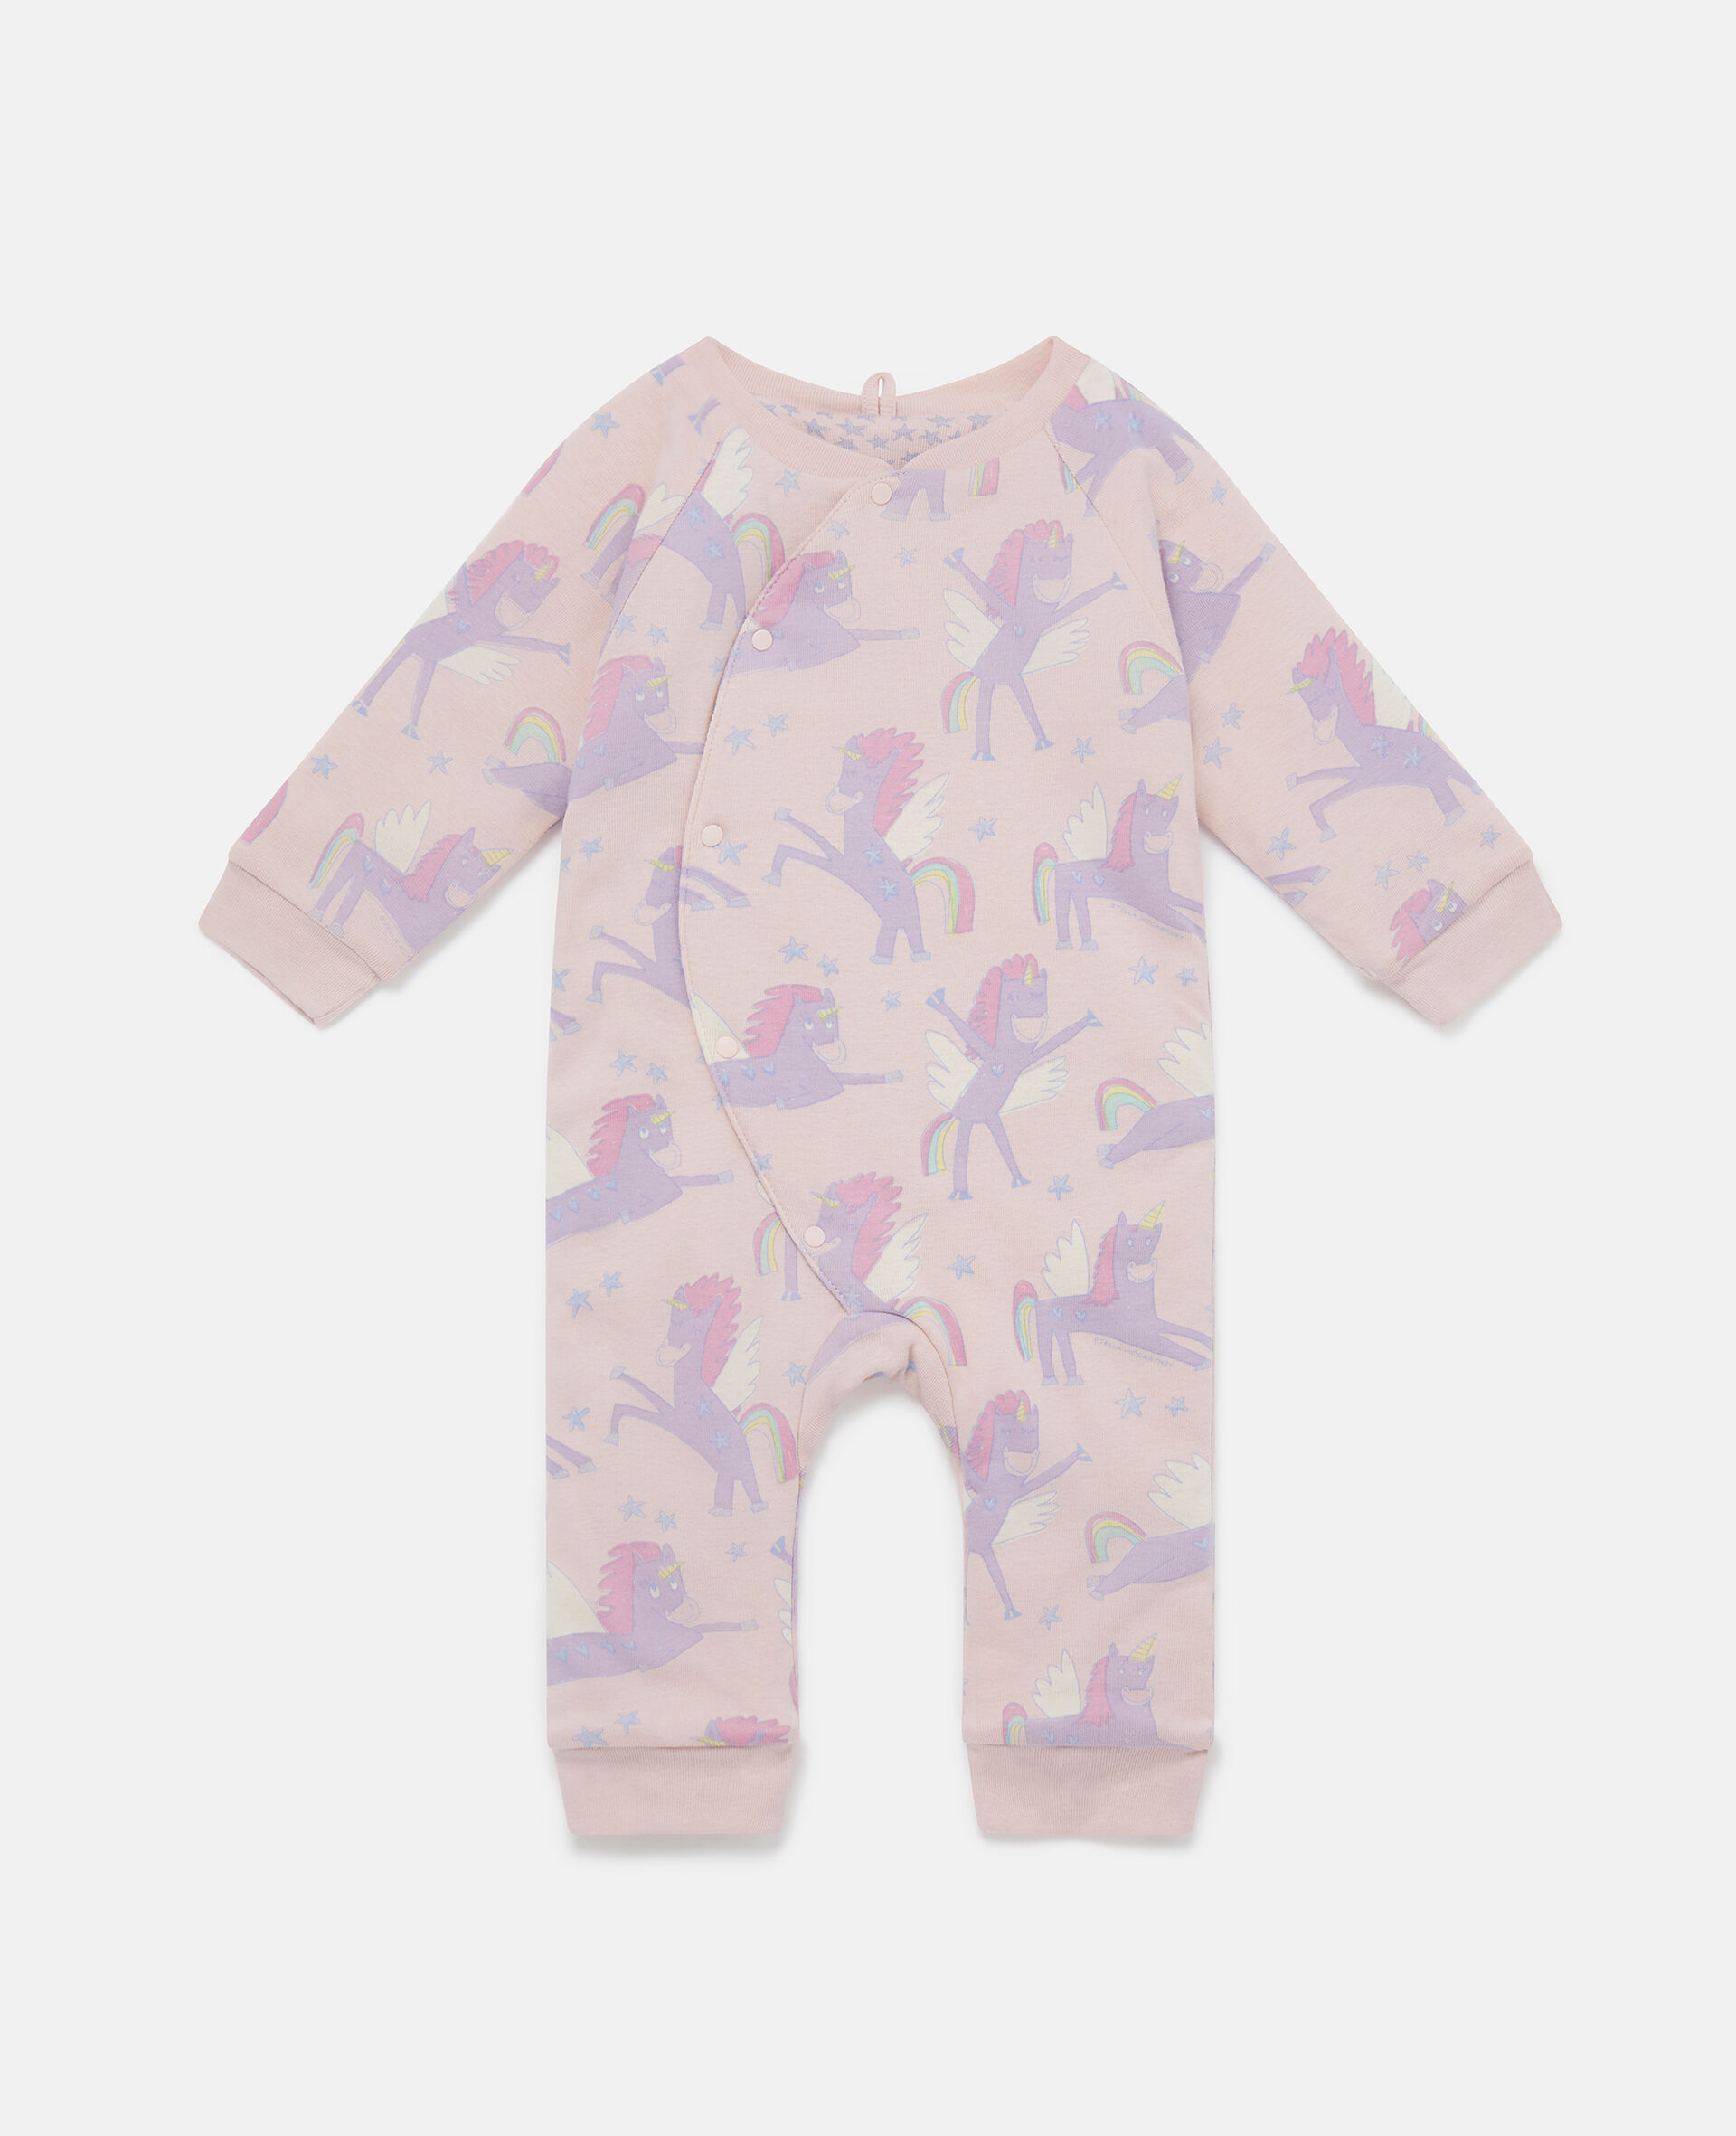 2 Pack of Unicorn and Star Print Sleepsuits-Pink-large image number 0